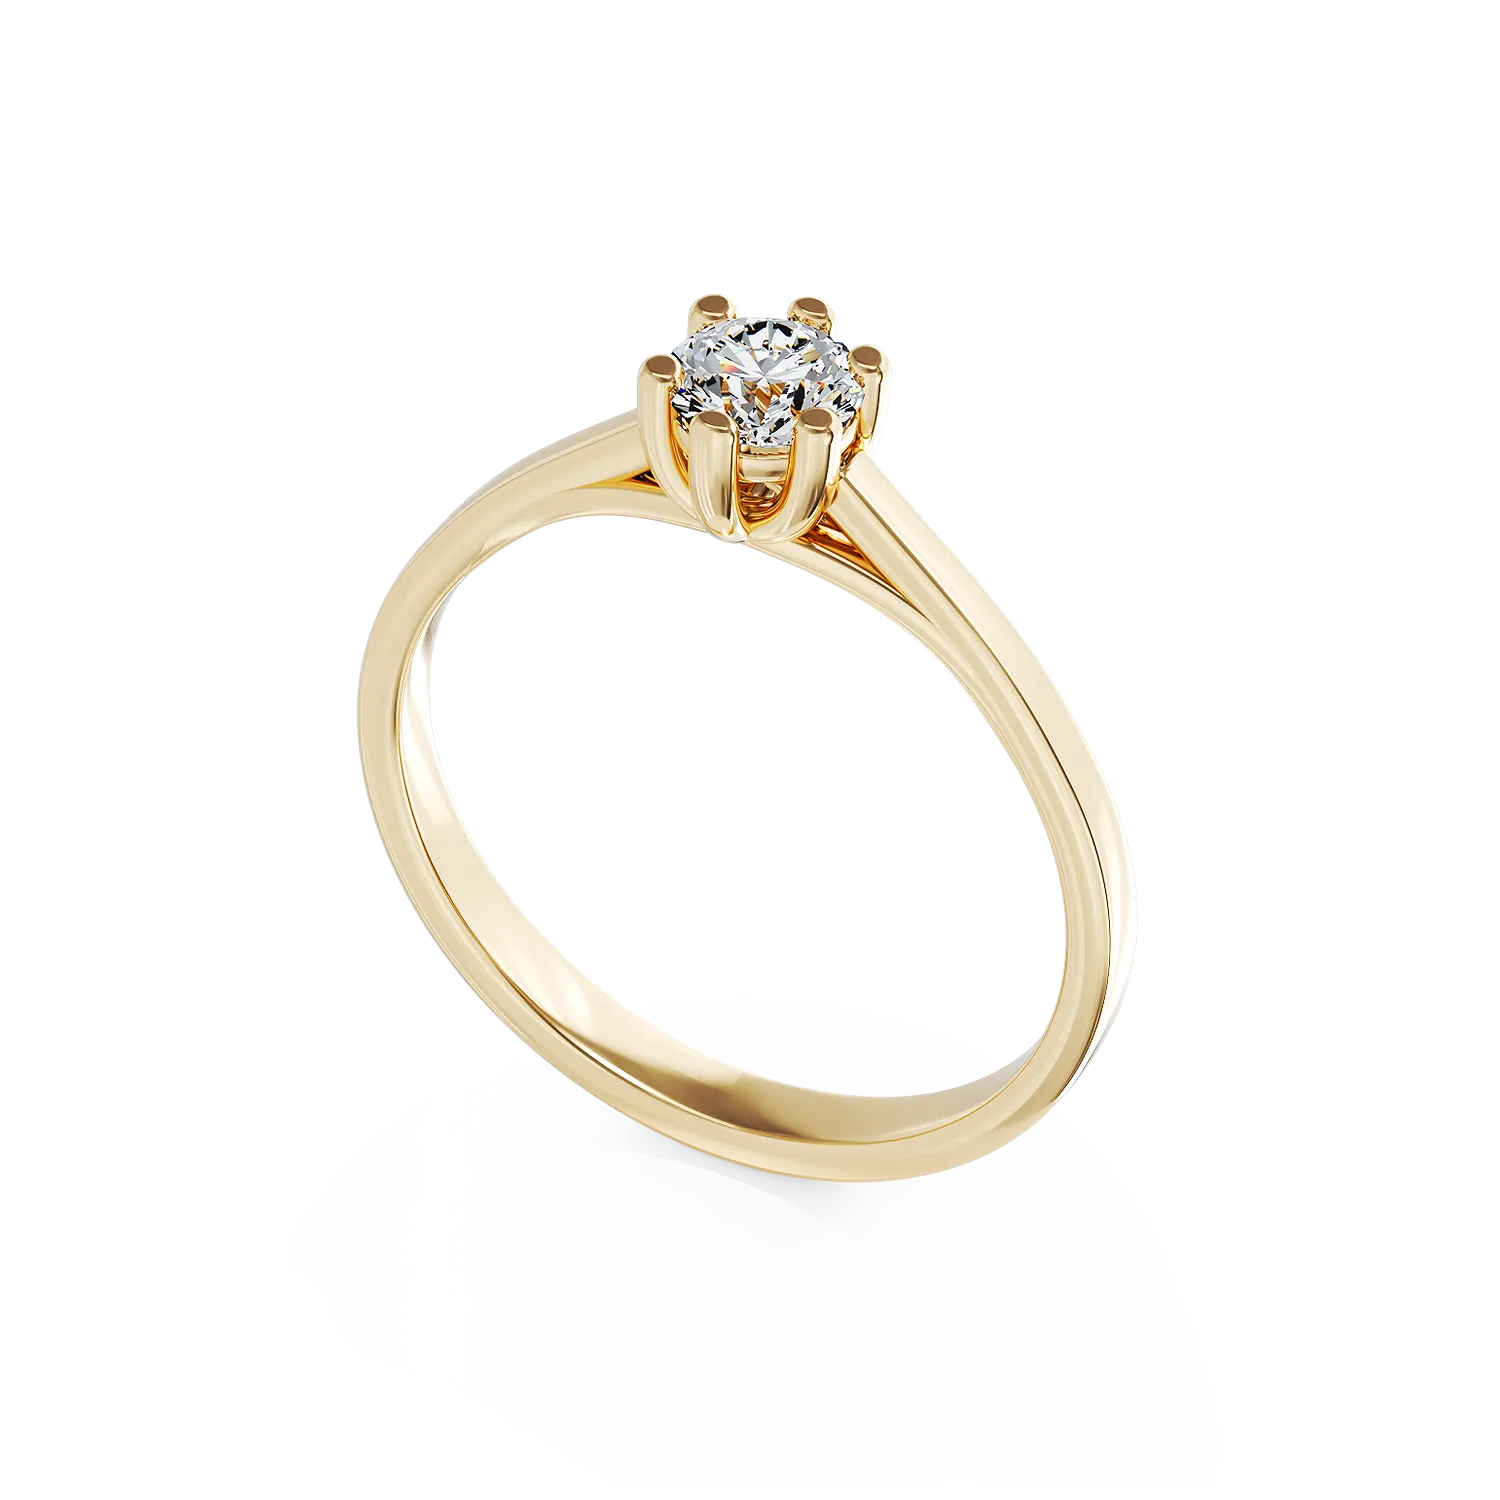 18k yellow gold engagement ring with 0.15ct diamond